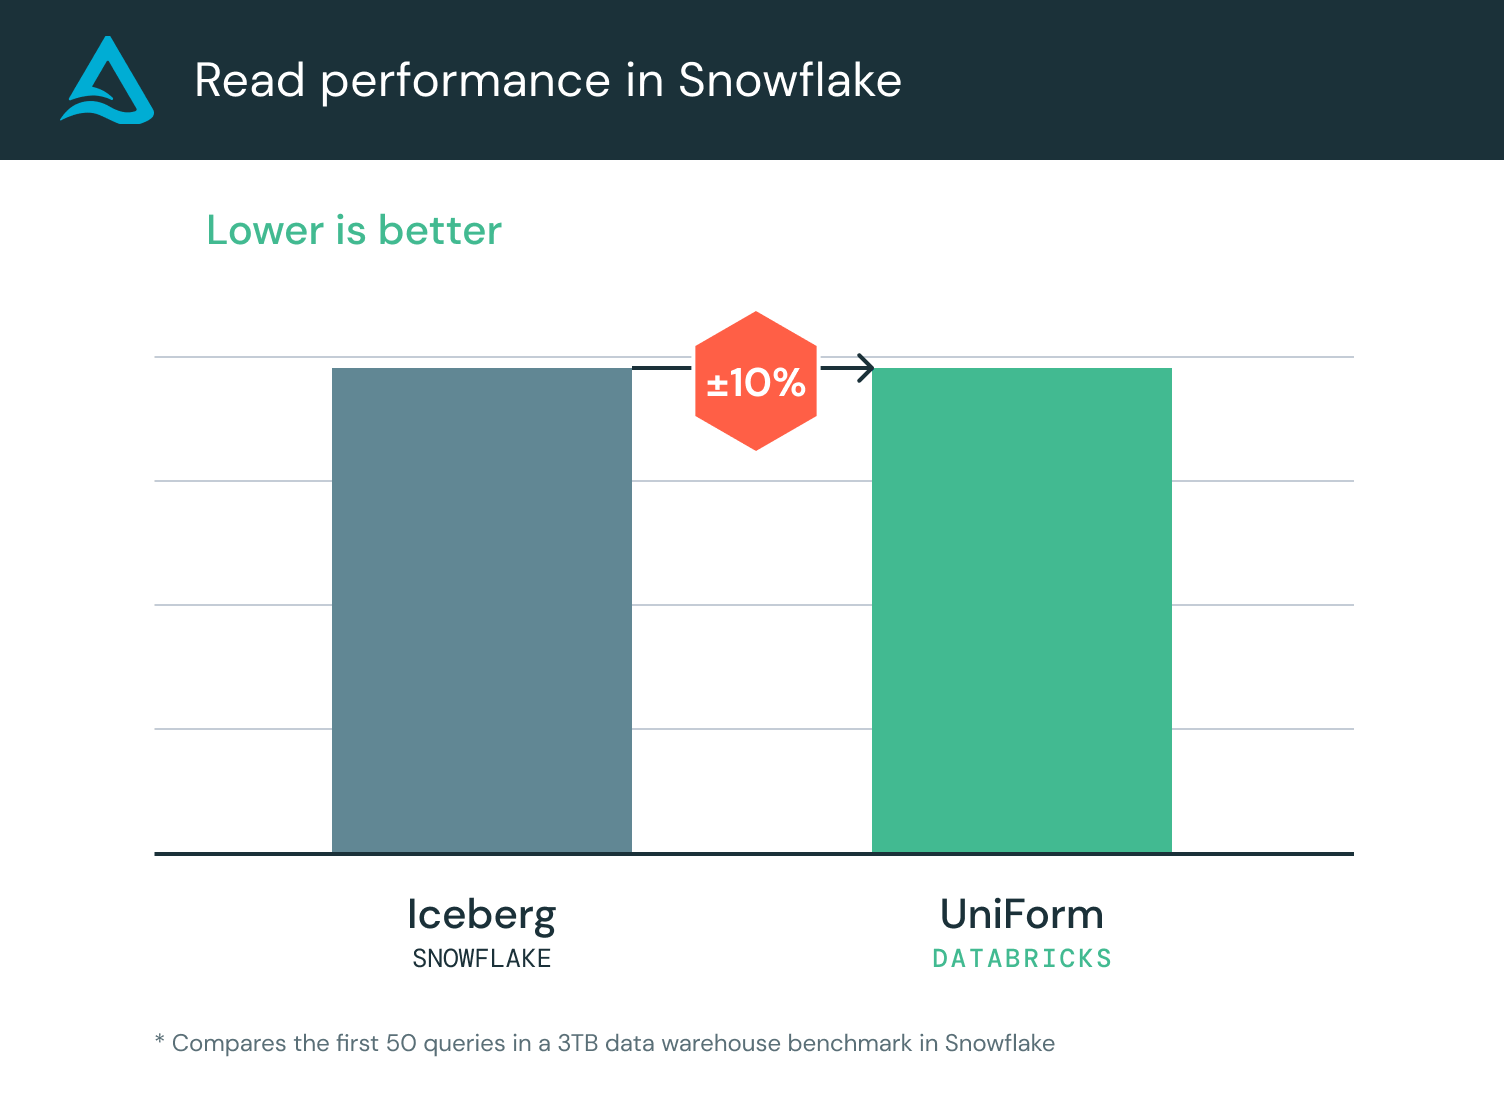 There is nearly no performance difference in reads